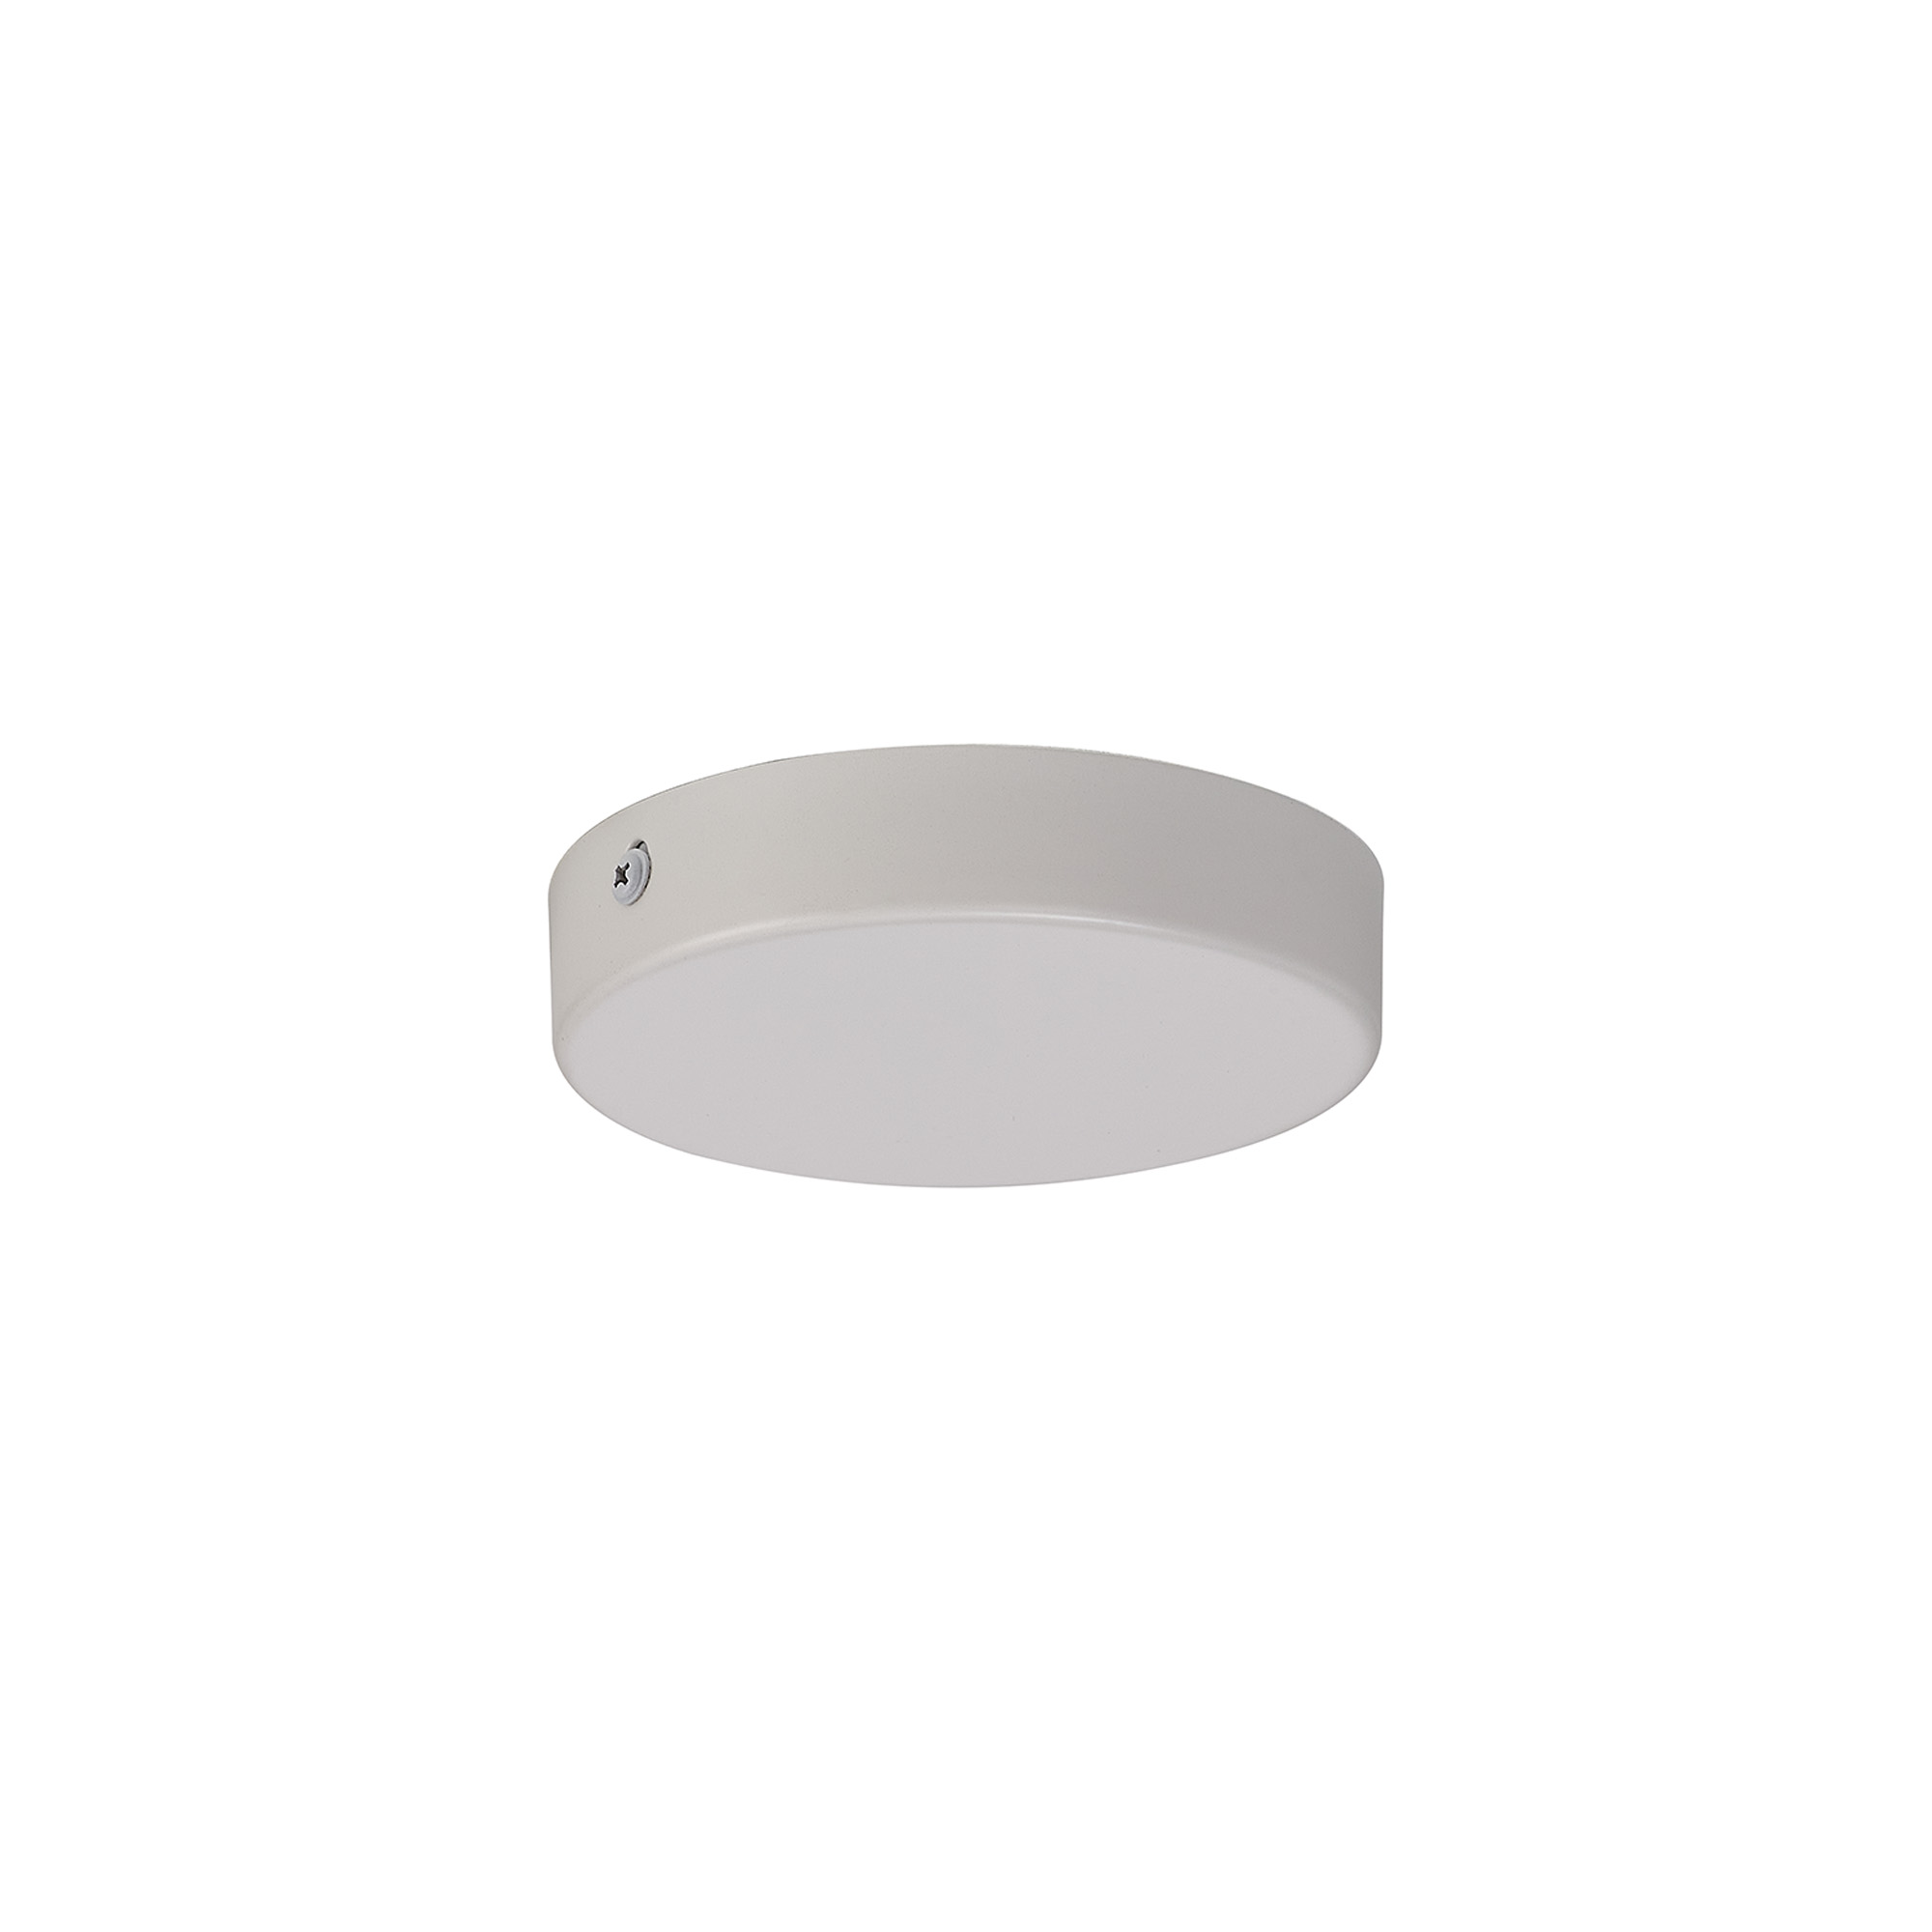 D0827WH/NH  Hayes No Hole 12cm Ceiling Plate White